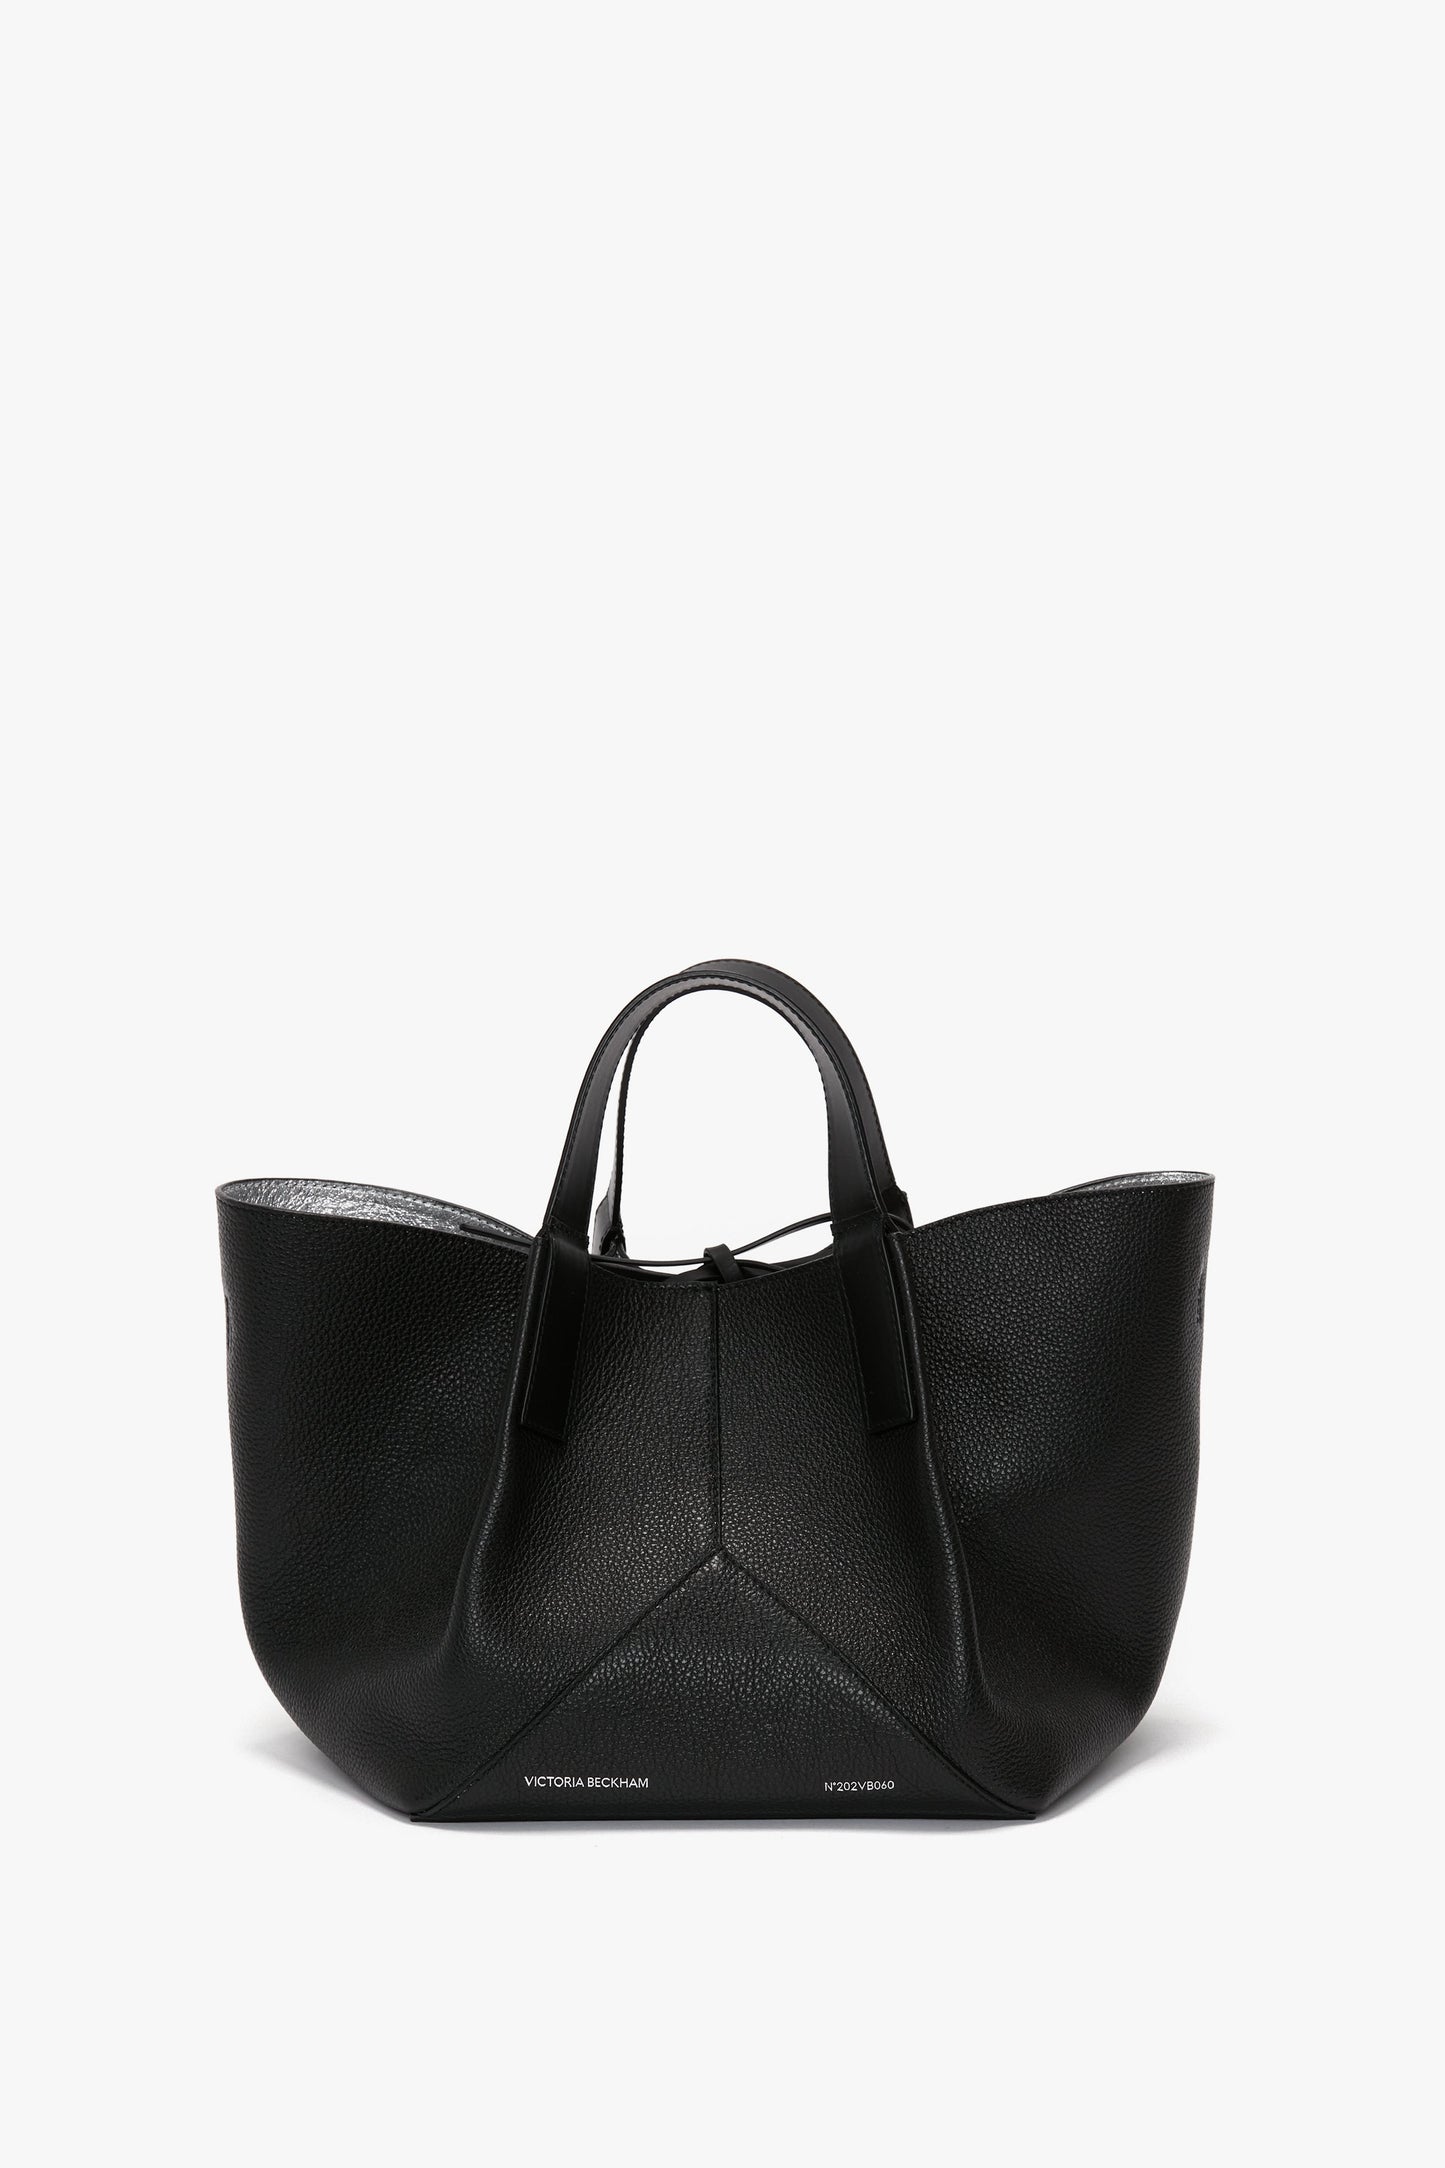 A W11 Mini Tote Bag In Black Leather by Victoria Beckham with short handles, crafted from grainy calf leather, featuring a structured design and minimal branding at the bottom.